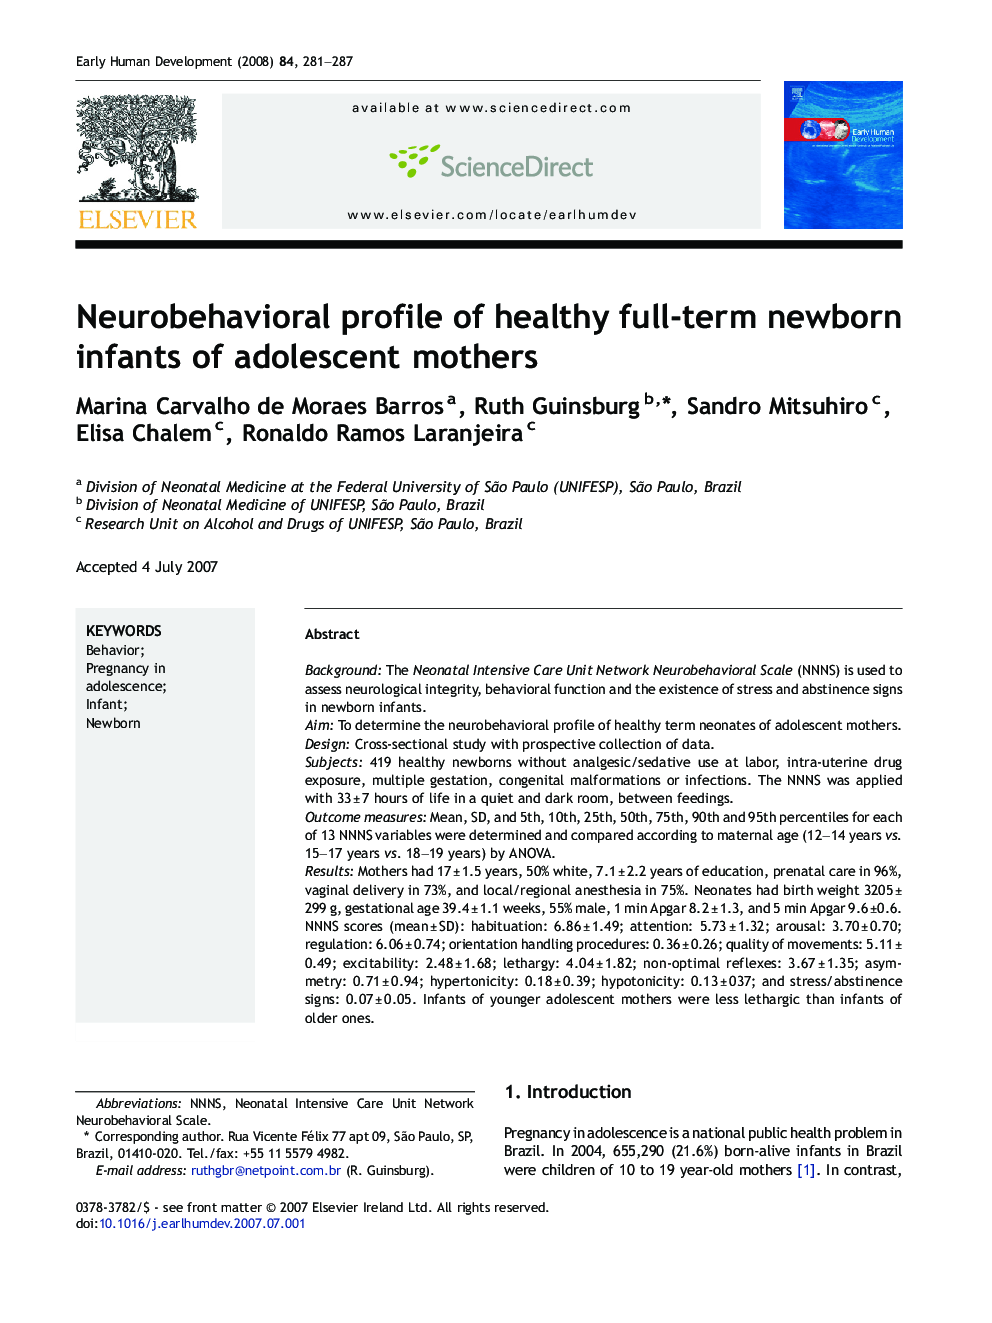 Neurobehavioral profile of healthy full-term newborn infants of adolescent mothers